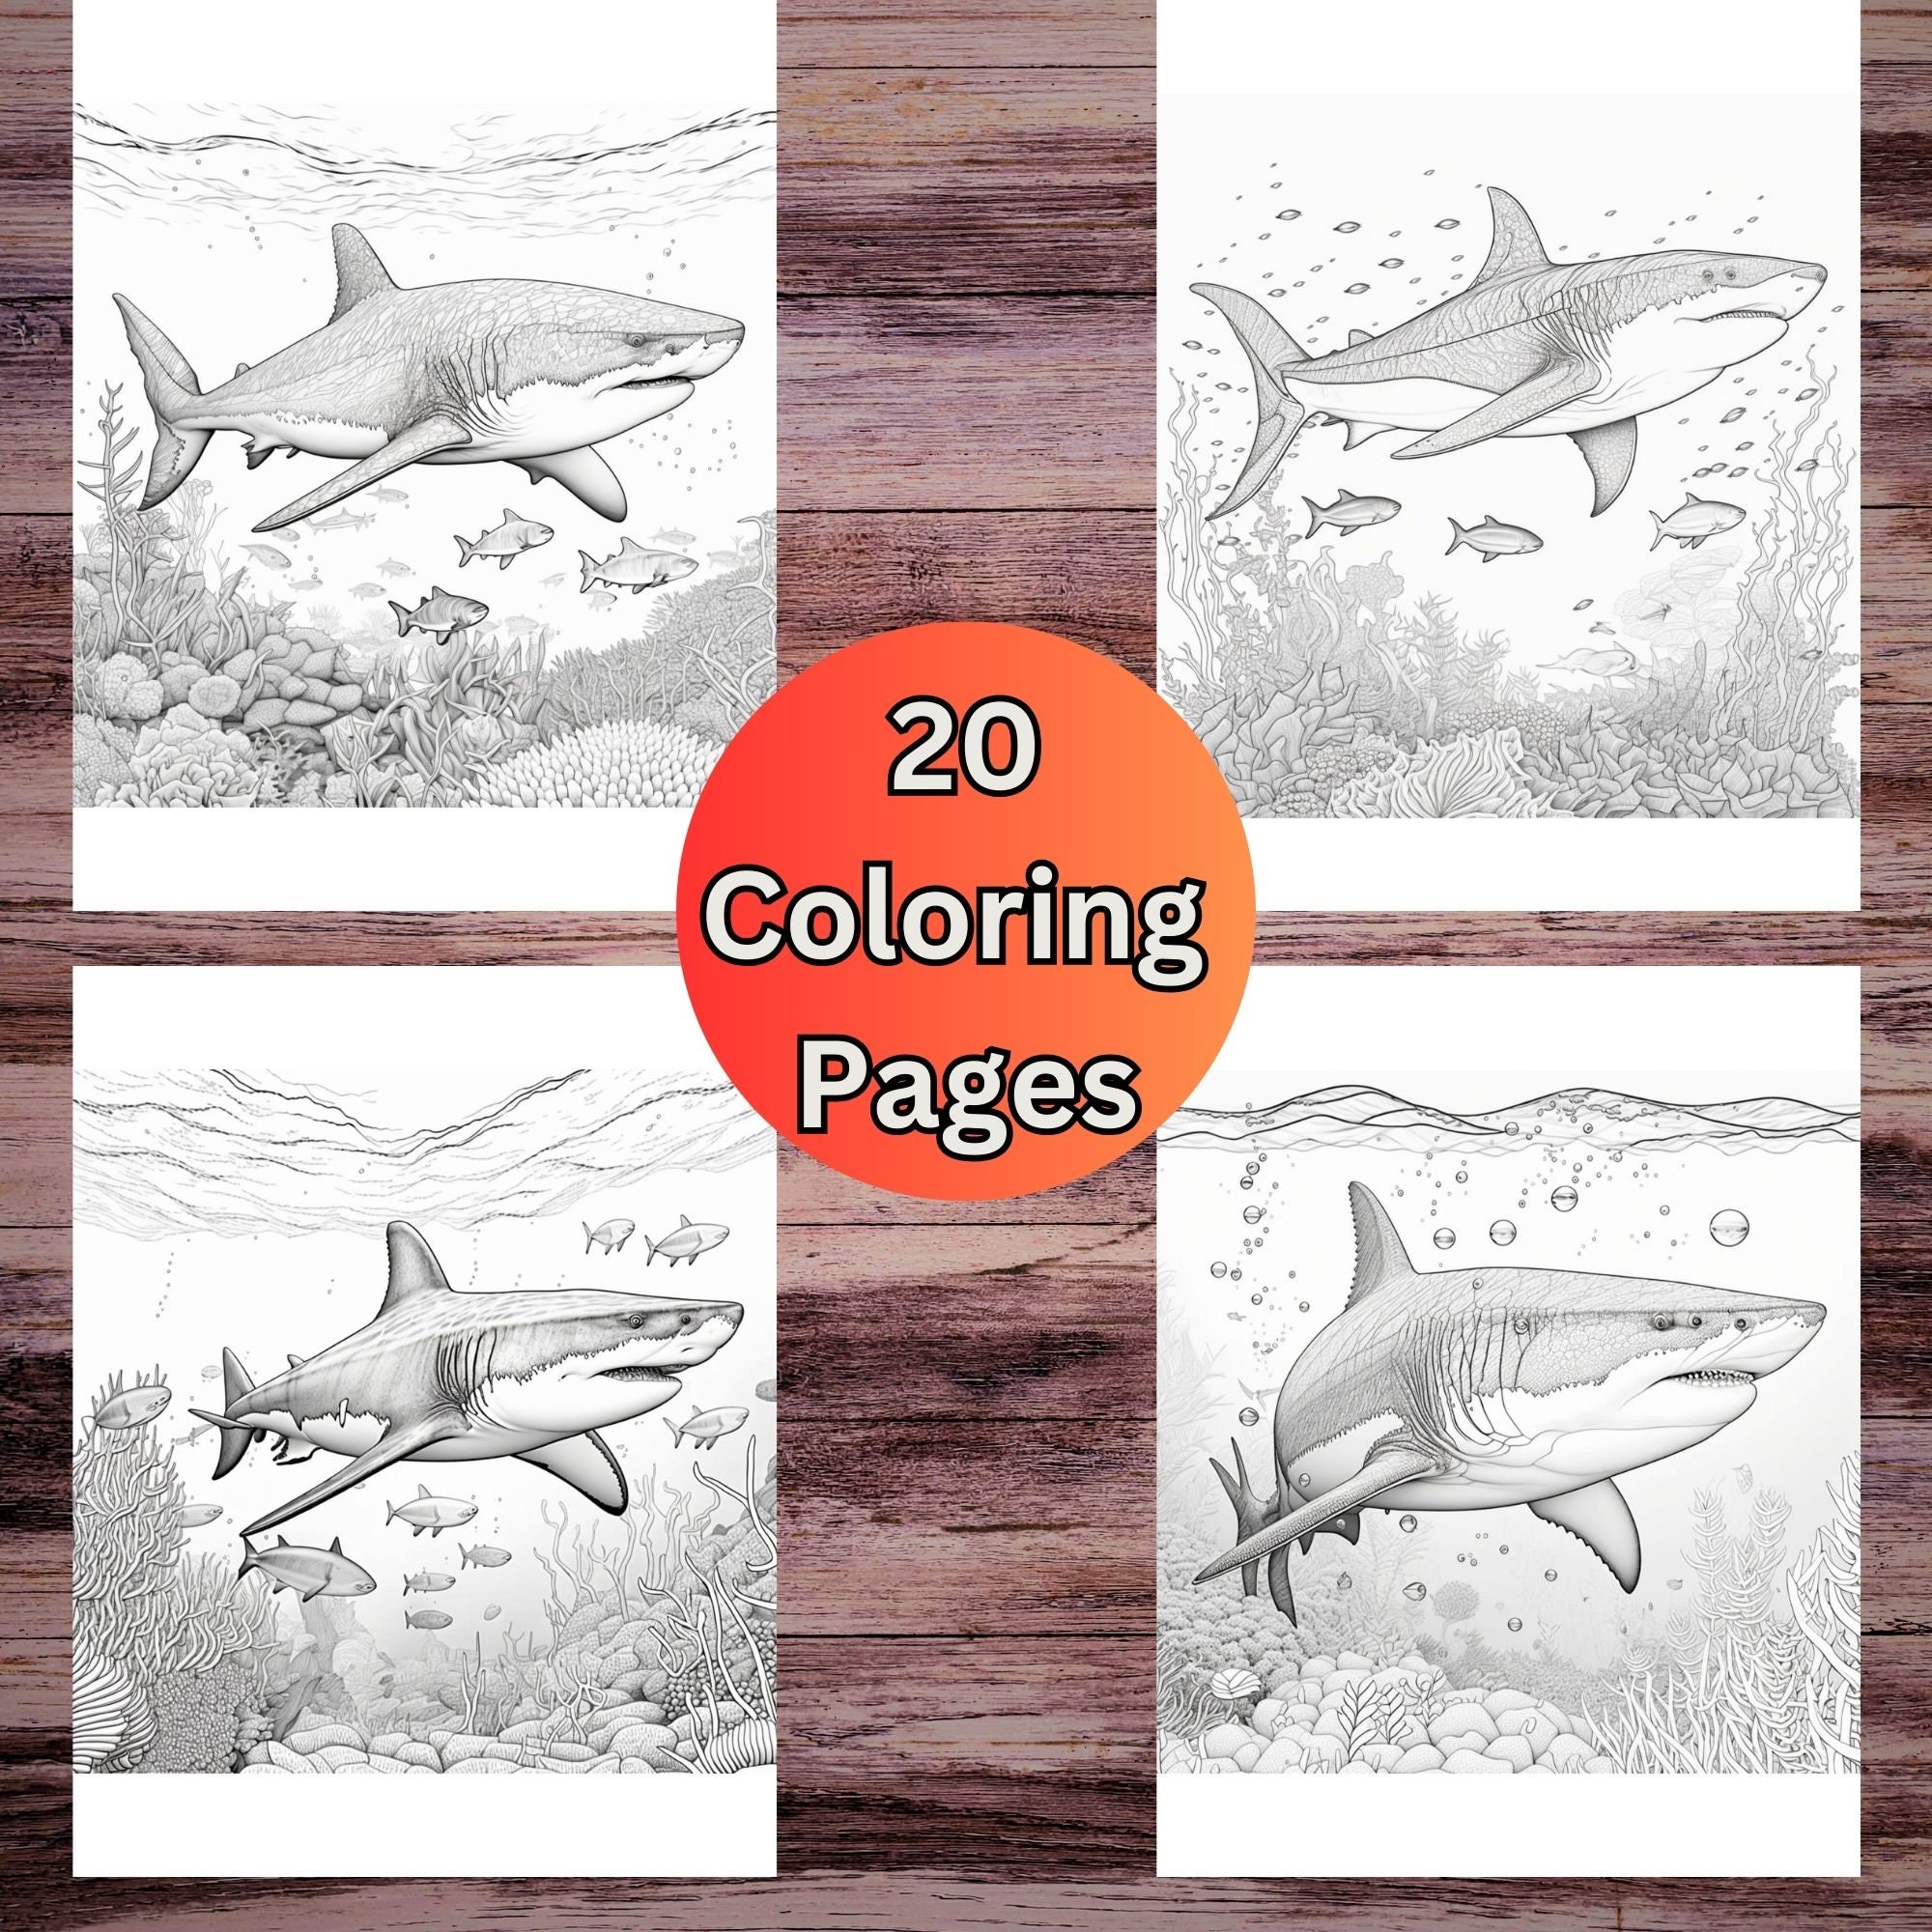 Realistic shark coloring pages for adults ocean life coloring book ocean coloring aquatic coloring pages ocean reef coloring page